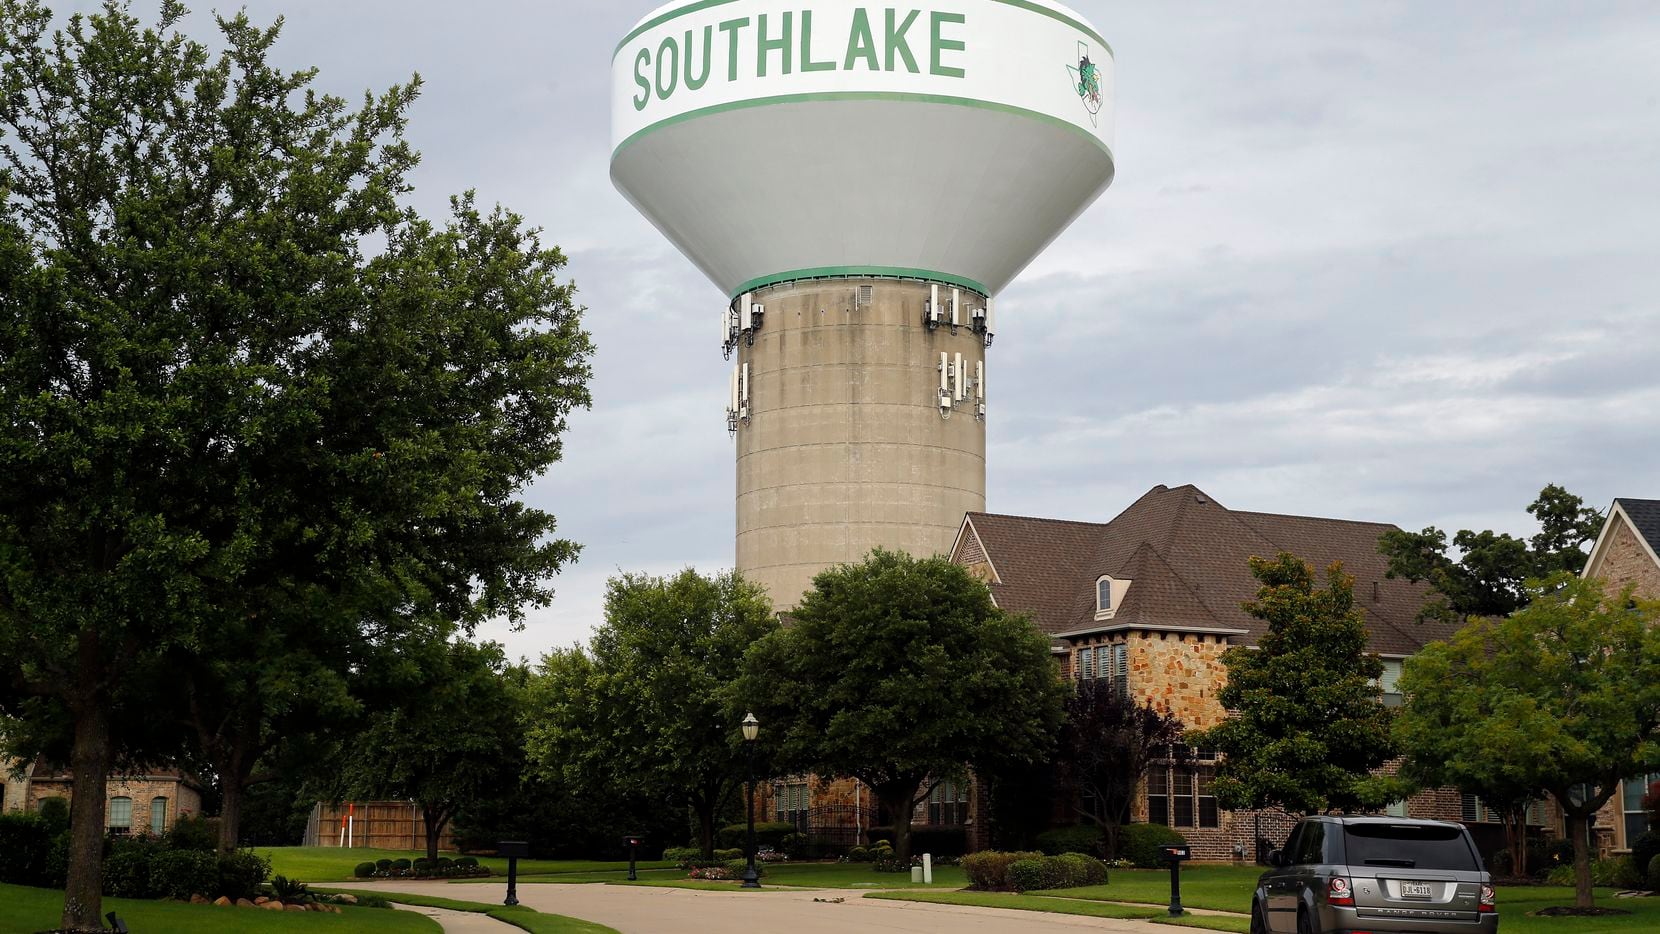 A Southlake water tower is pictured in a Southlake, Texas neighborhood Tuesday, June 23, 2020.